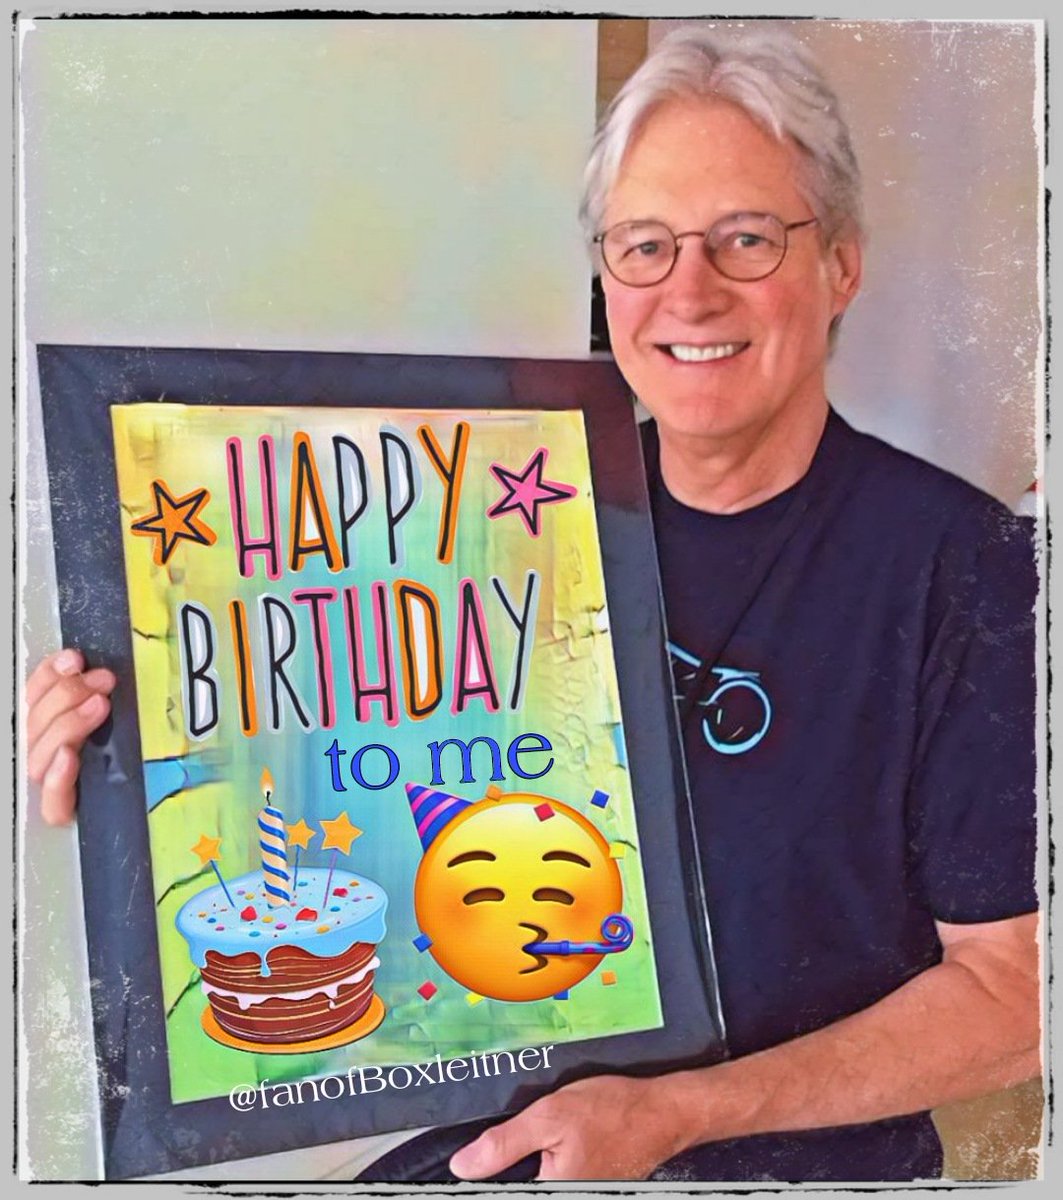 Let's all wish Bruce a Happy Birthday! Hope he is enjoying his birthday today,
May 12th
#BruceBoxleitner 
#happybirthday